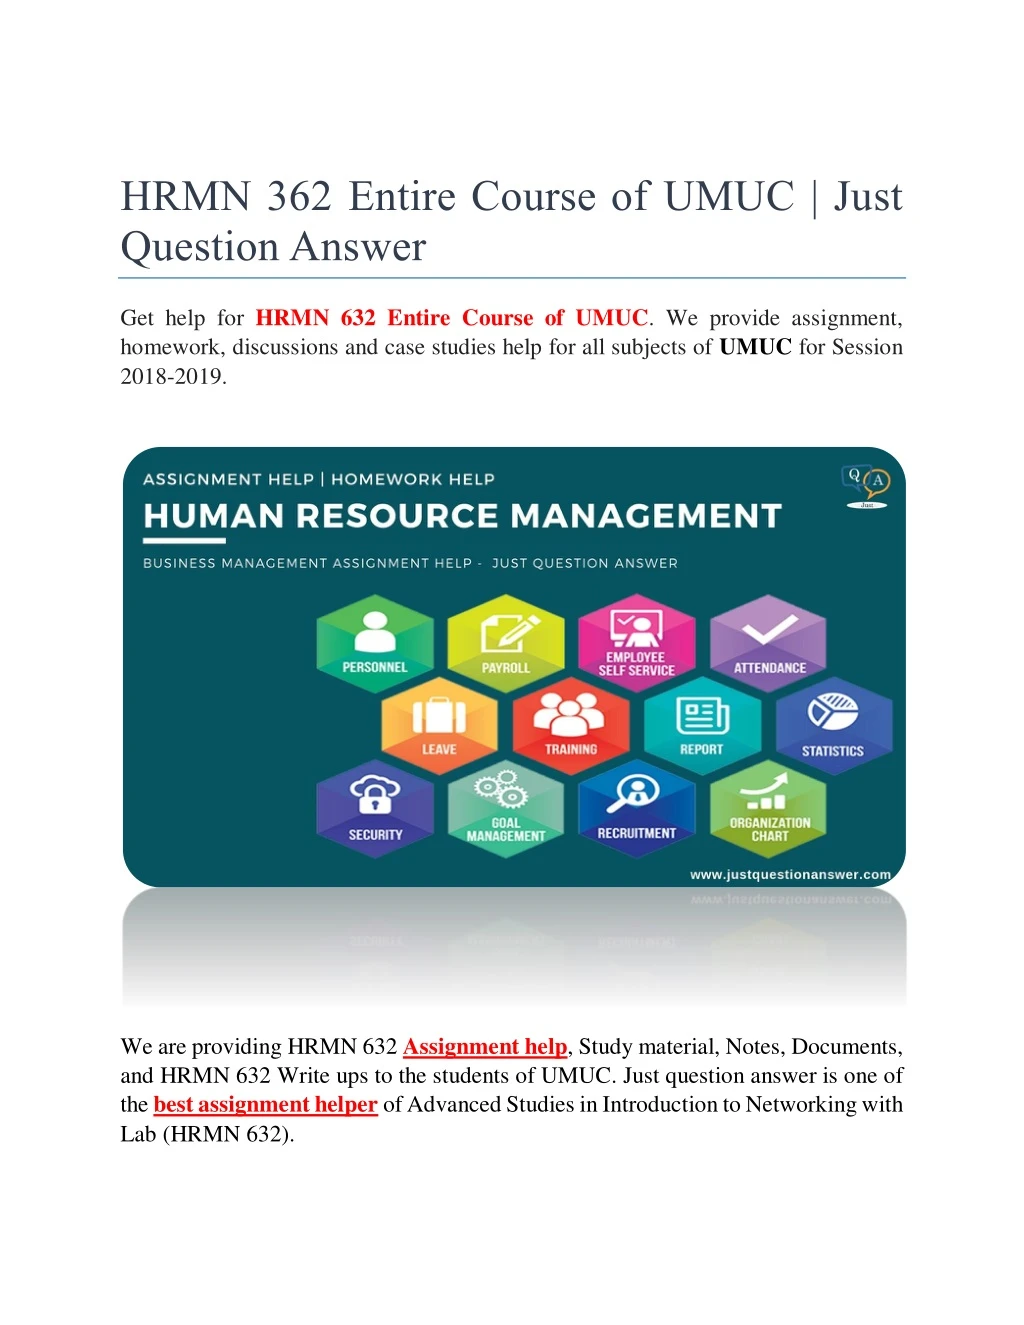 hrmn 362 entire course of umuc just question